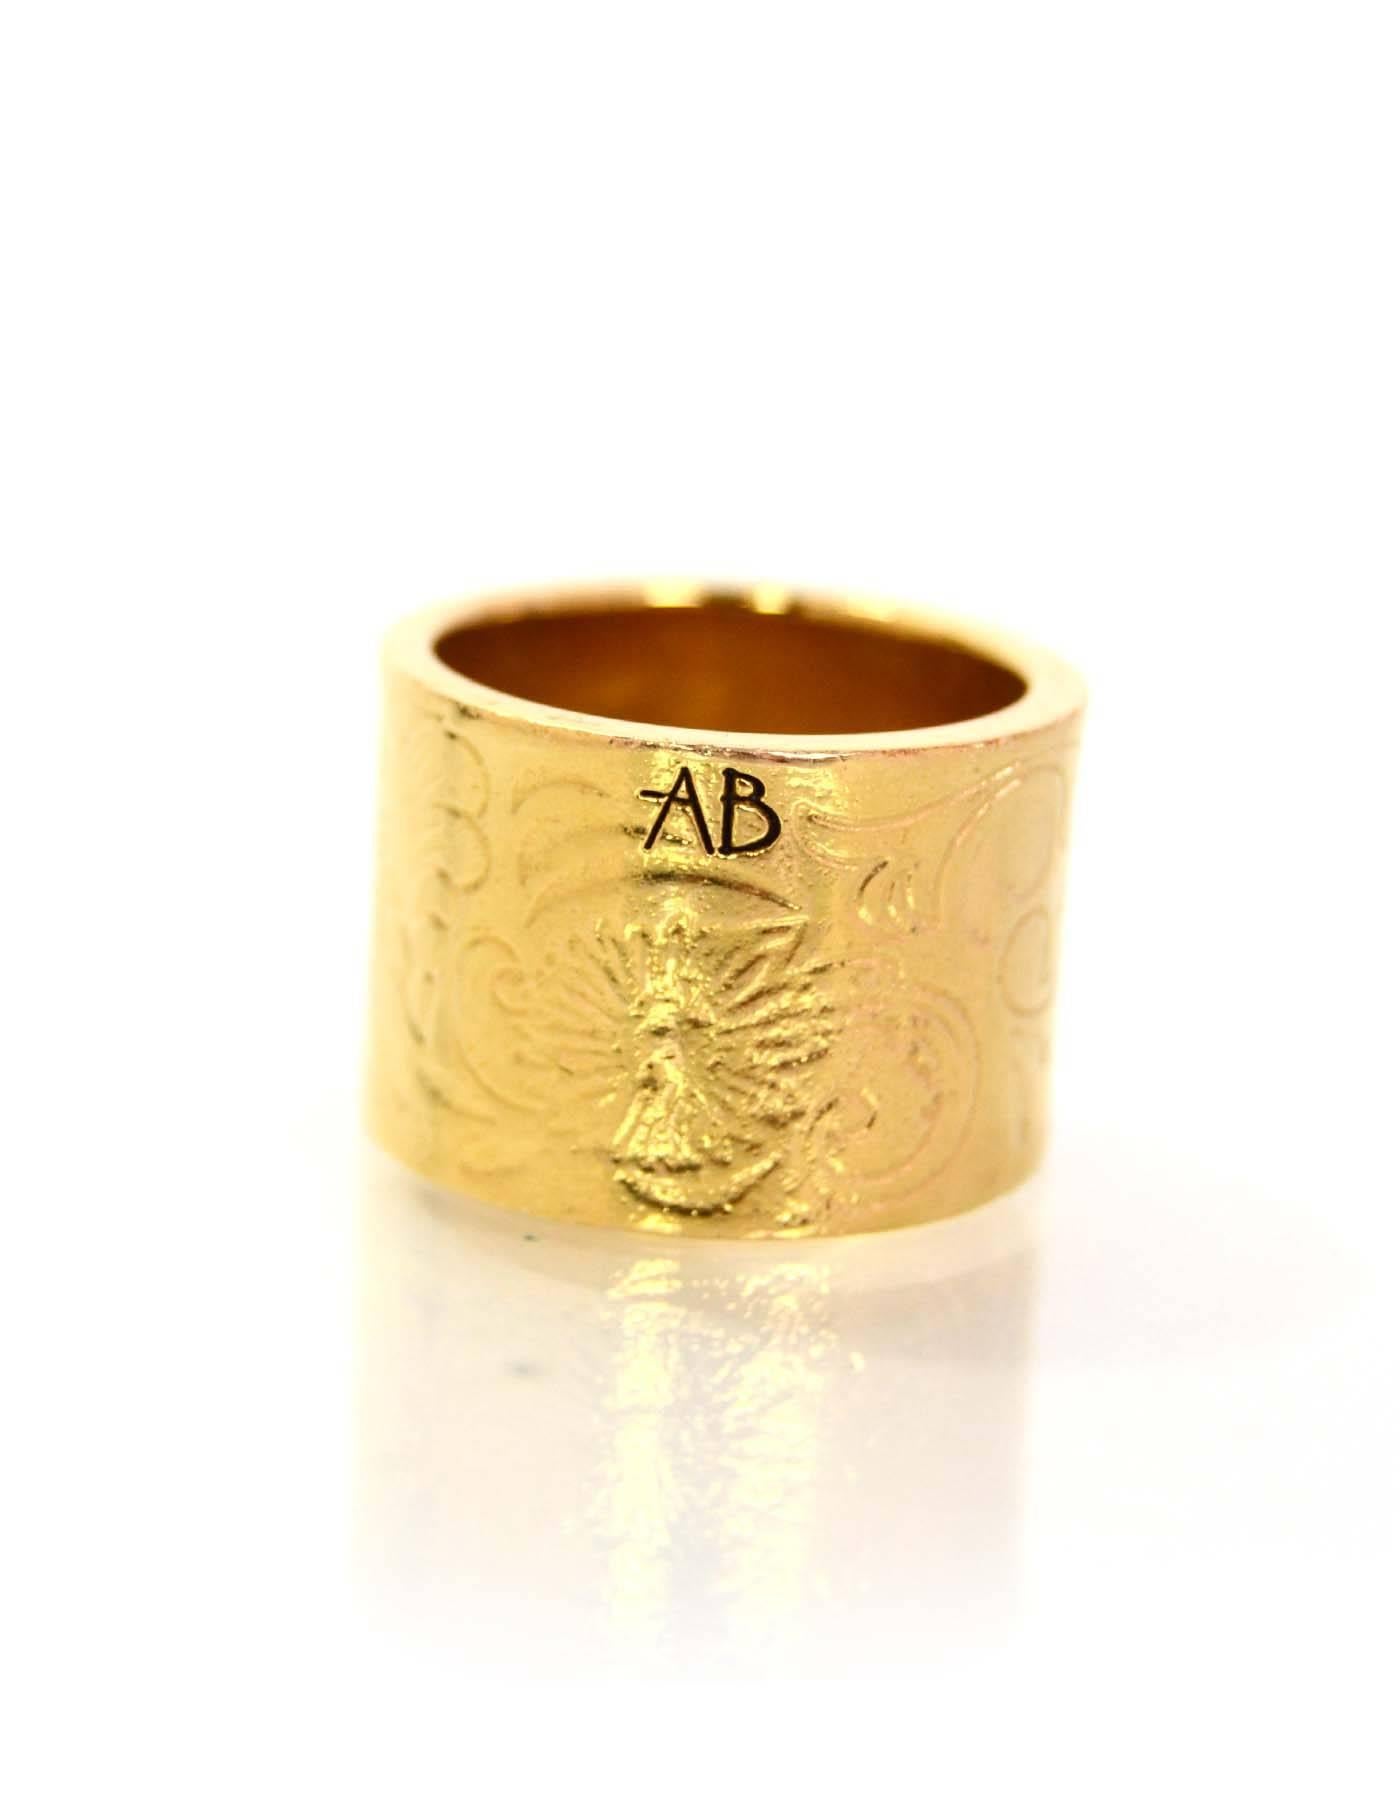 Women's Aurelie Bidermann Engraved Gold-Plated and Turquoise Ring Sz 7